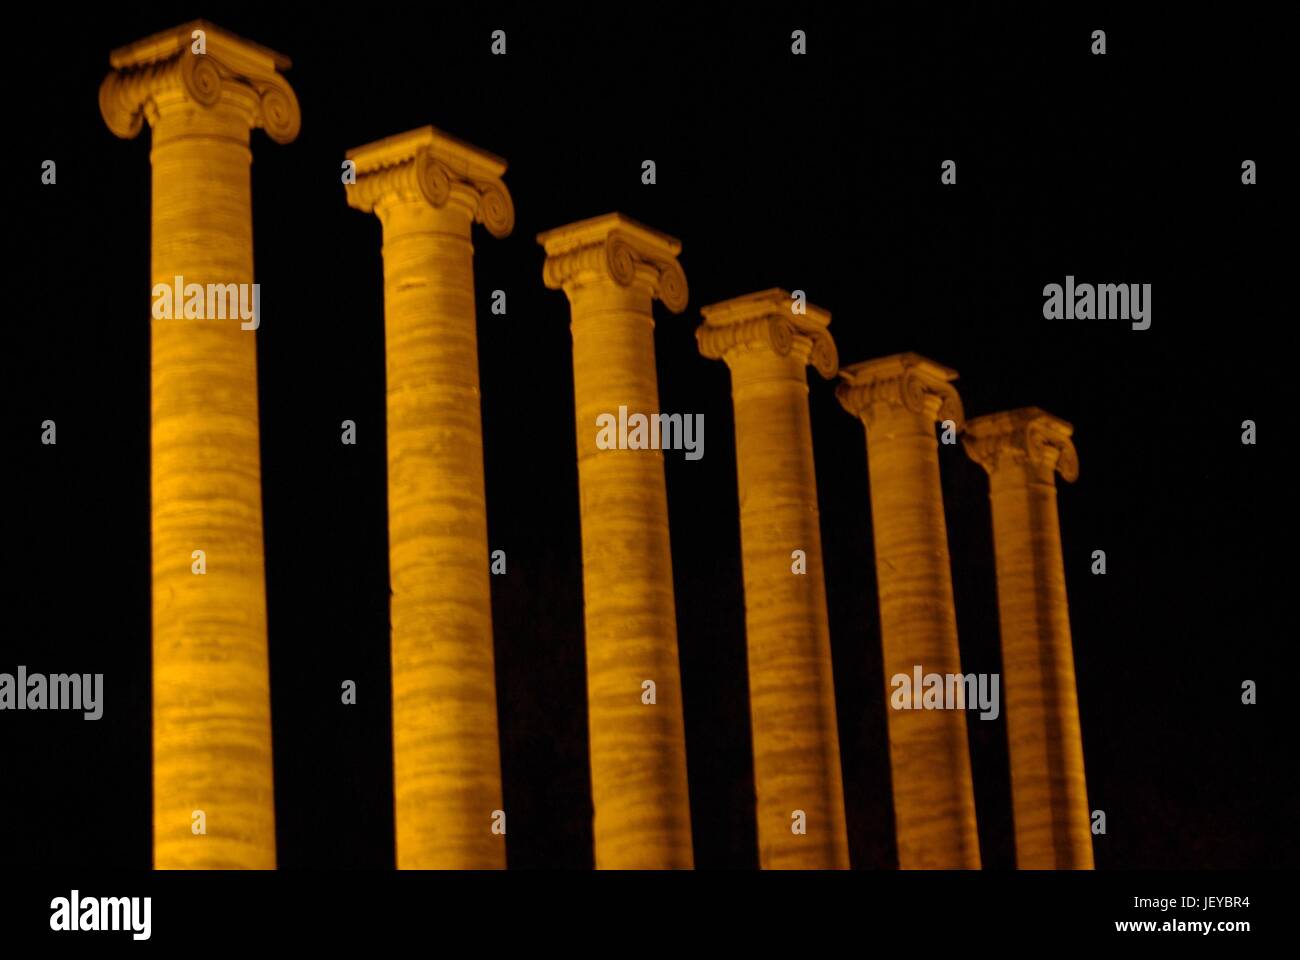 The Columns after a Game Stock Photo